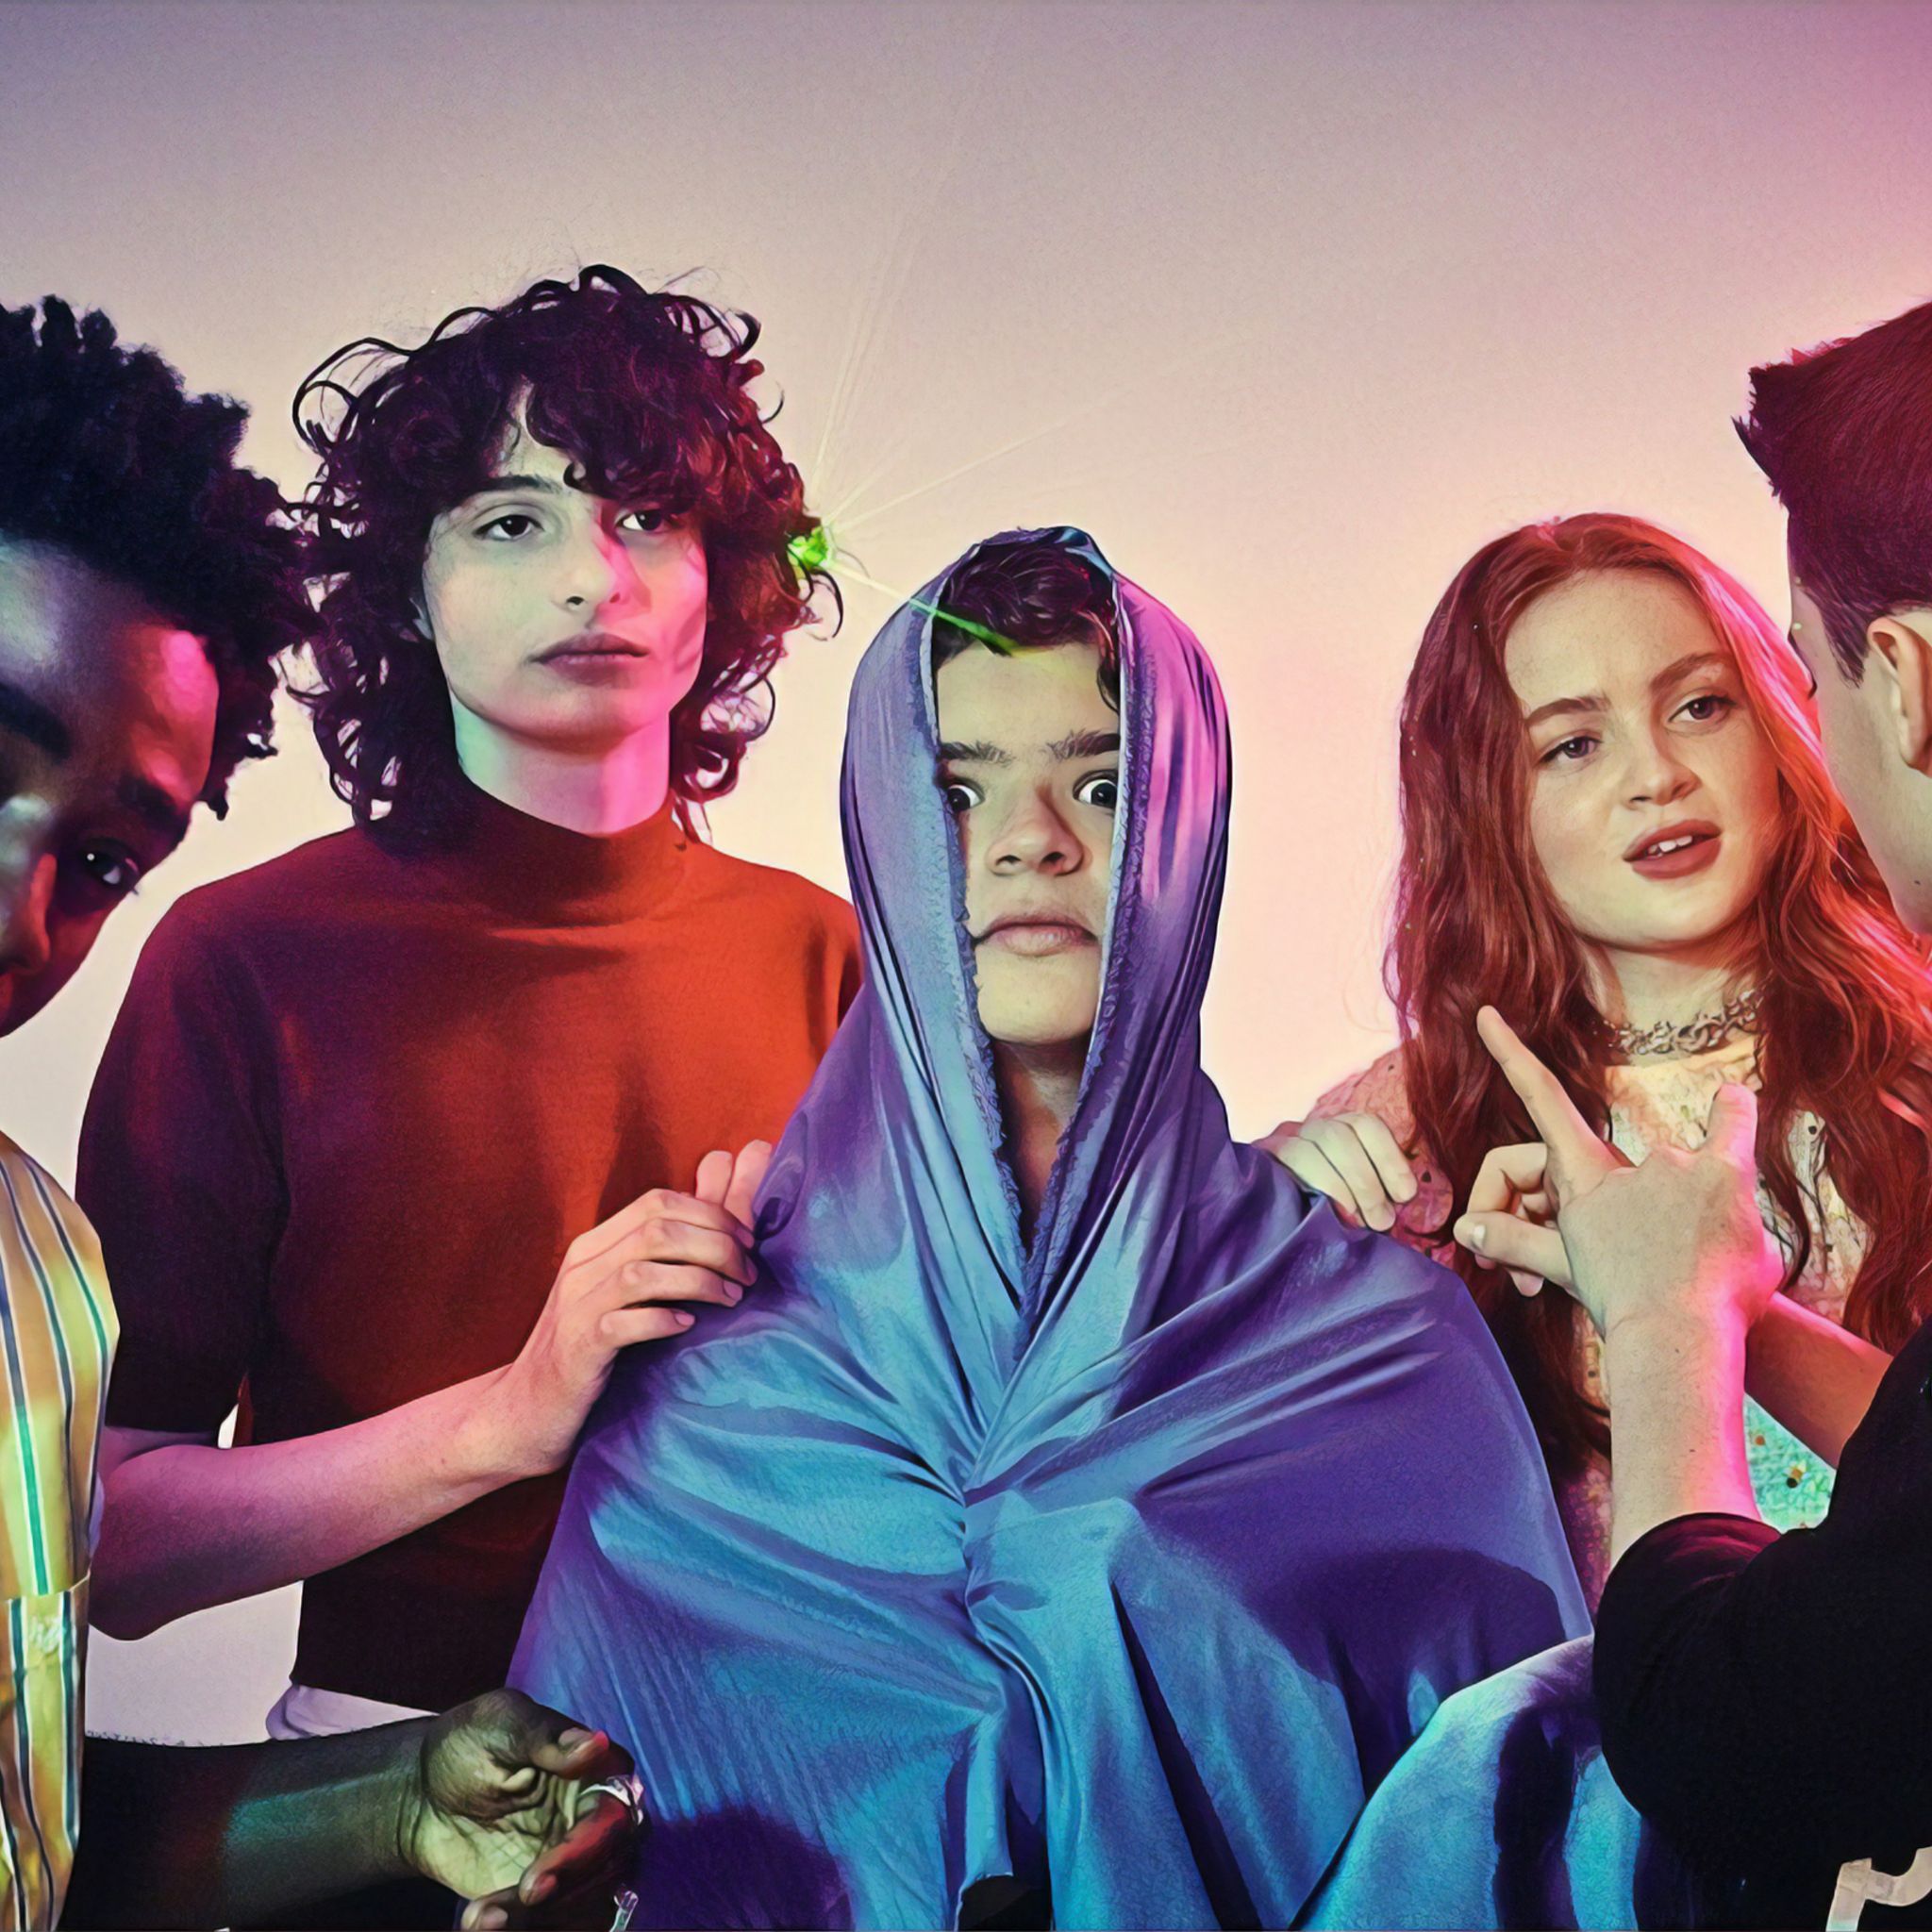 The cast of 'Stranger Things' season 3, including Millie Bobby Brown, Finn Wolfhard, and Gaten Matarazzo, in a promotional image. - Stranger Things